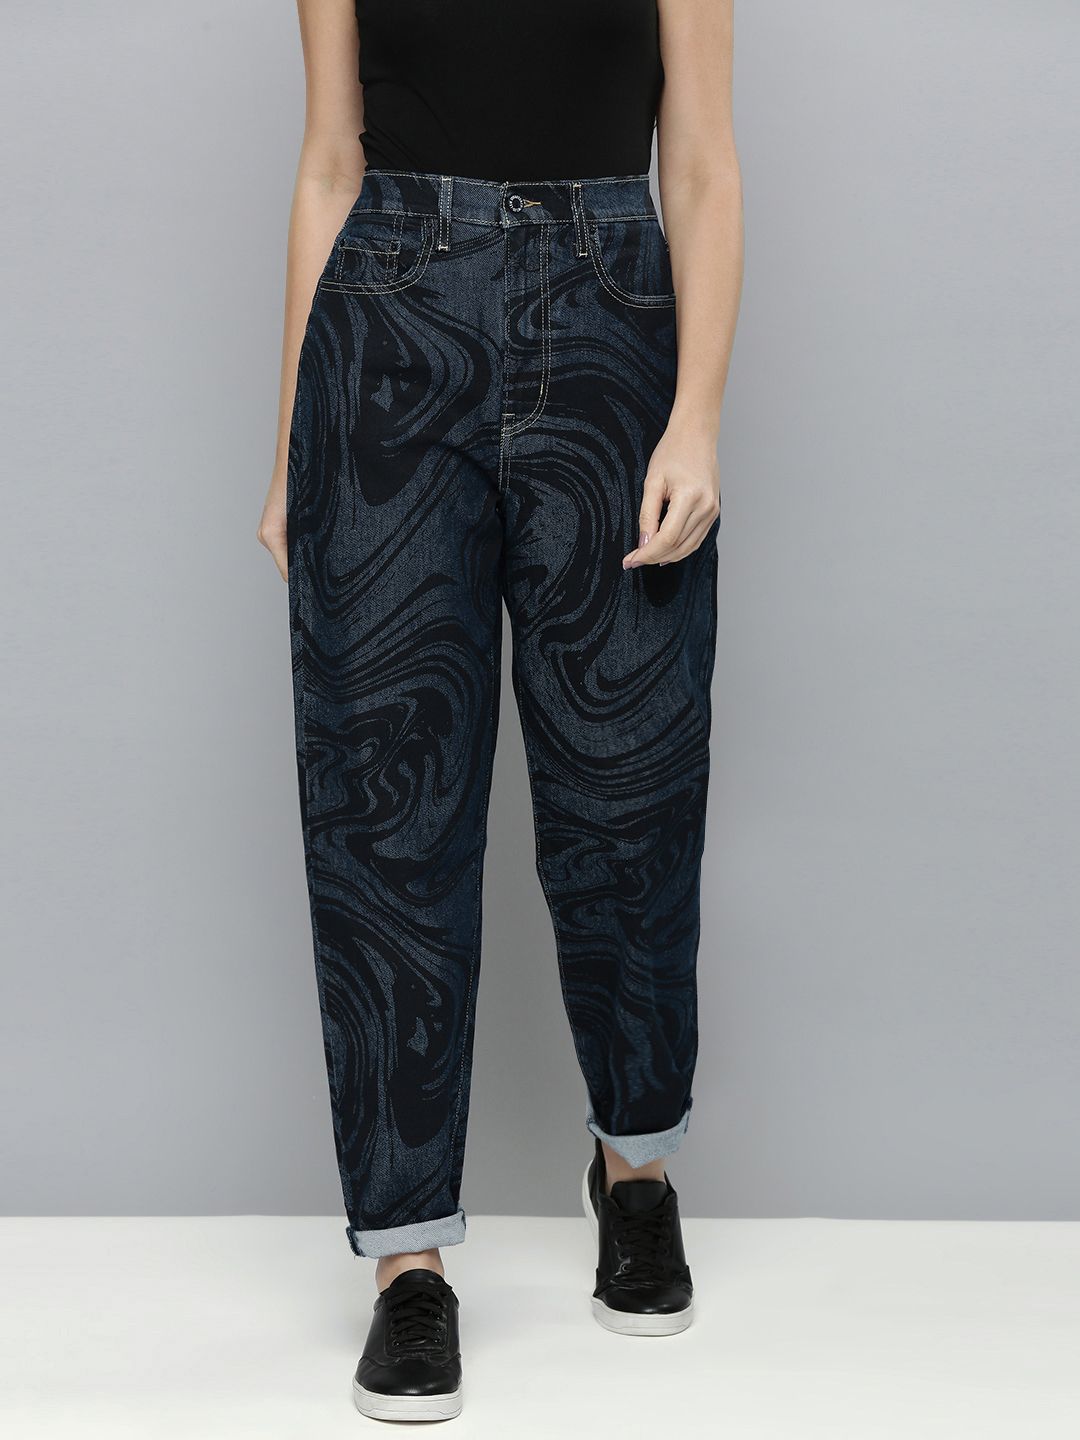 Levi's X Deepika Padukone Women Blue Relaxed Fit High-Rise Printed Jeans Price in India